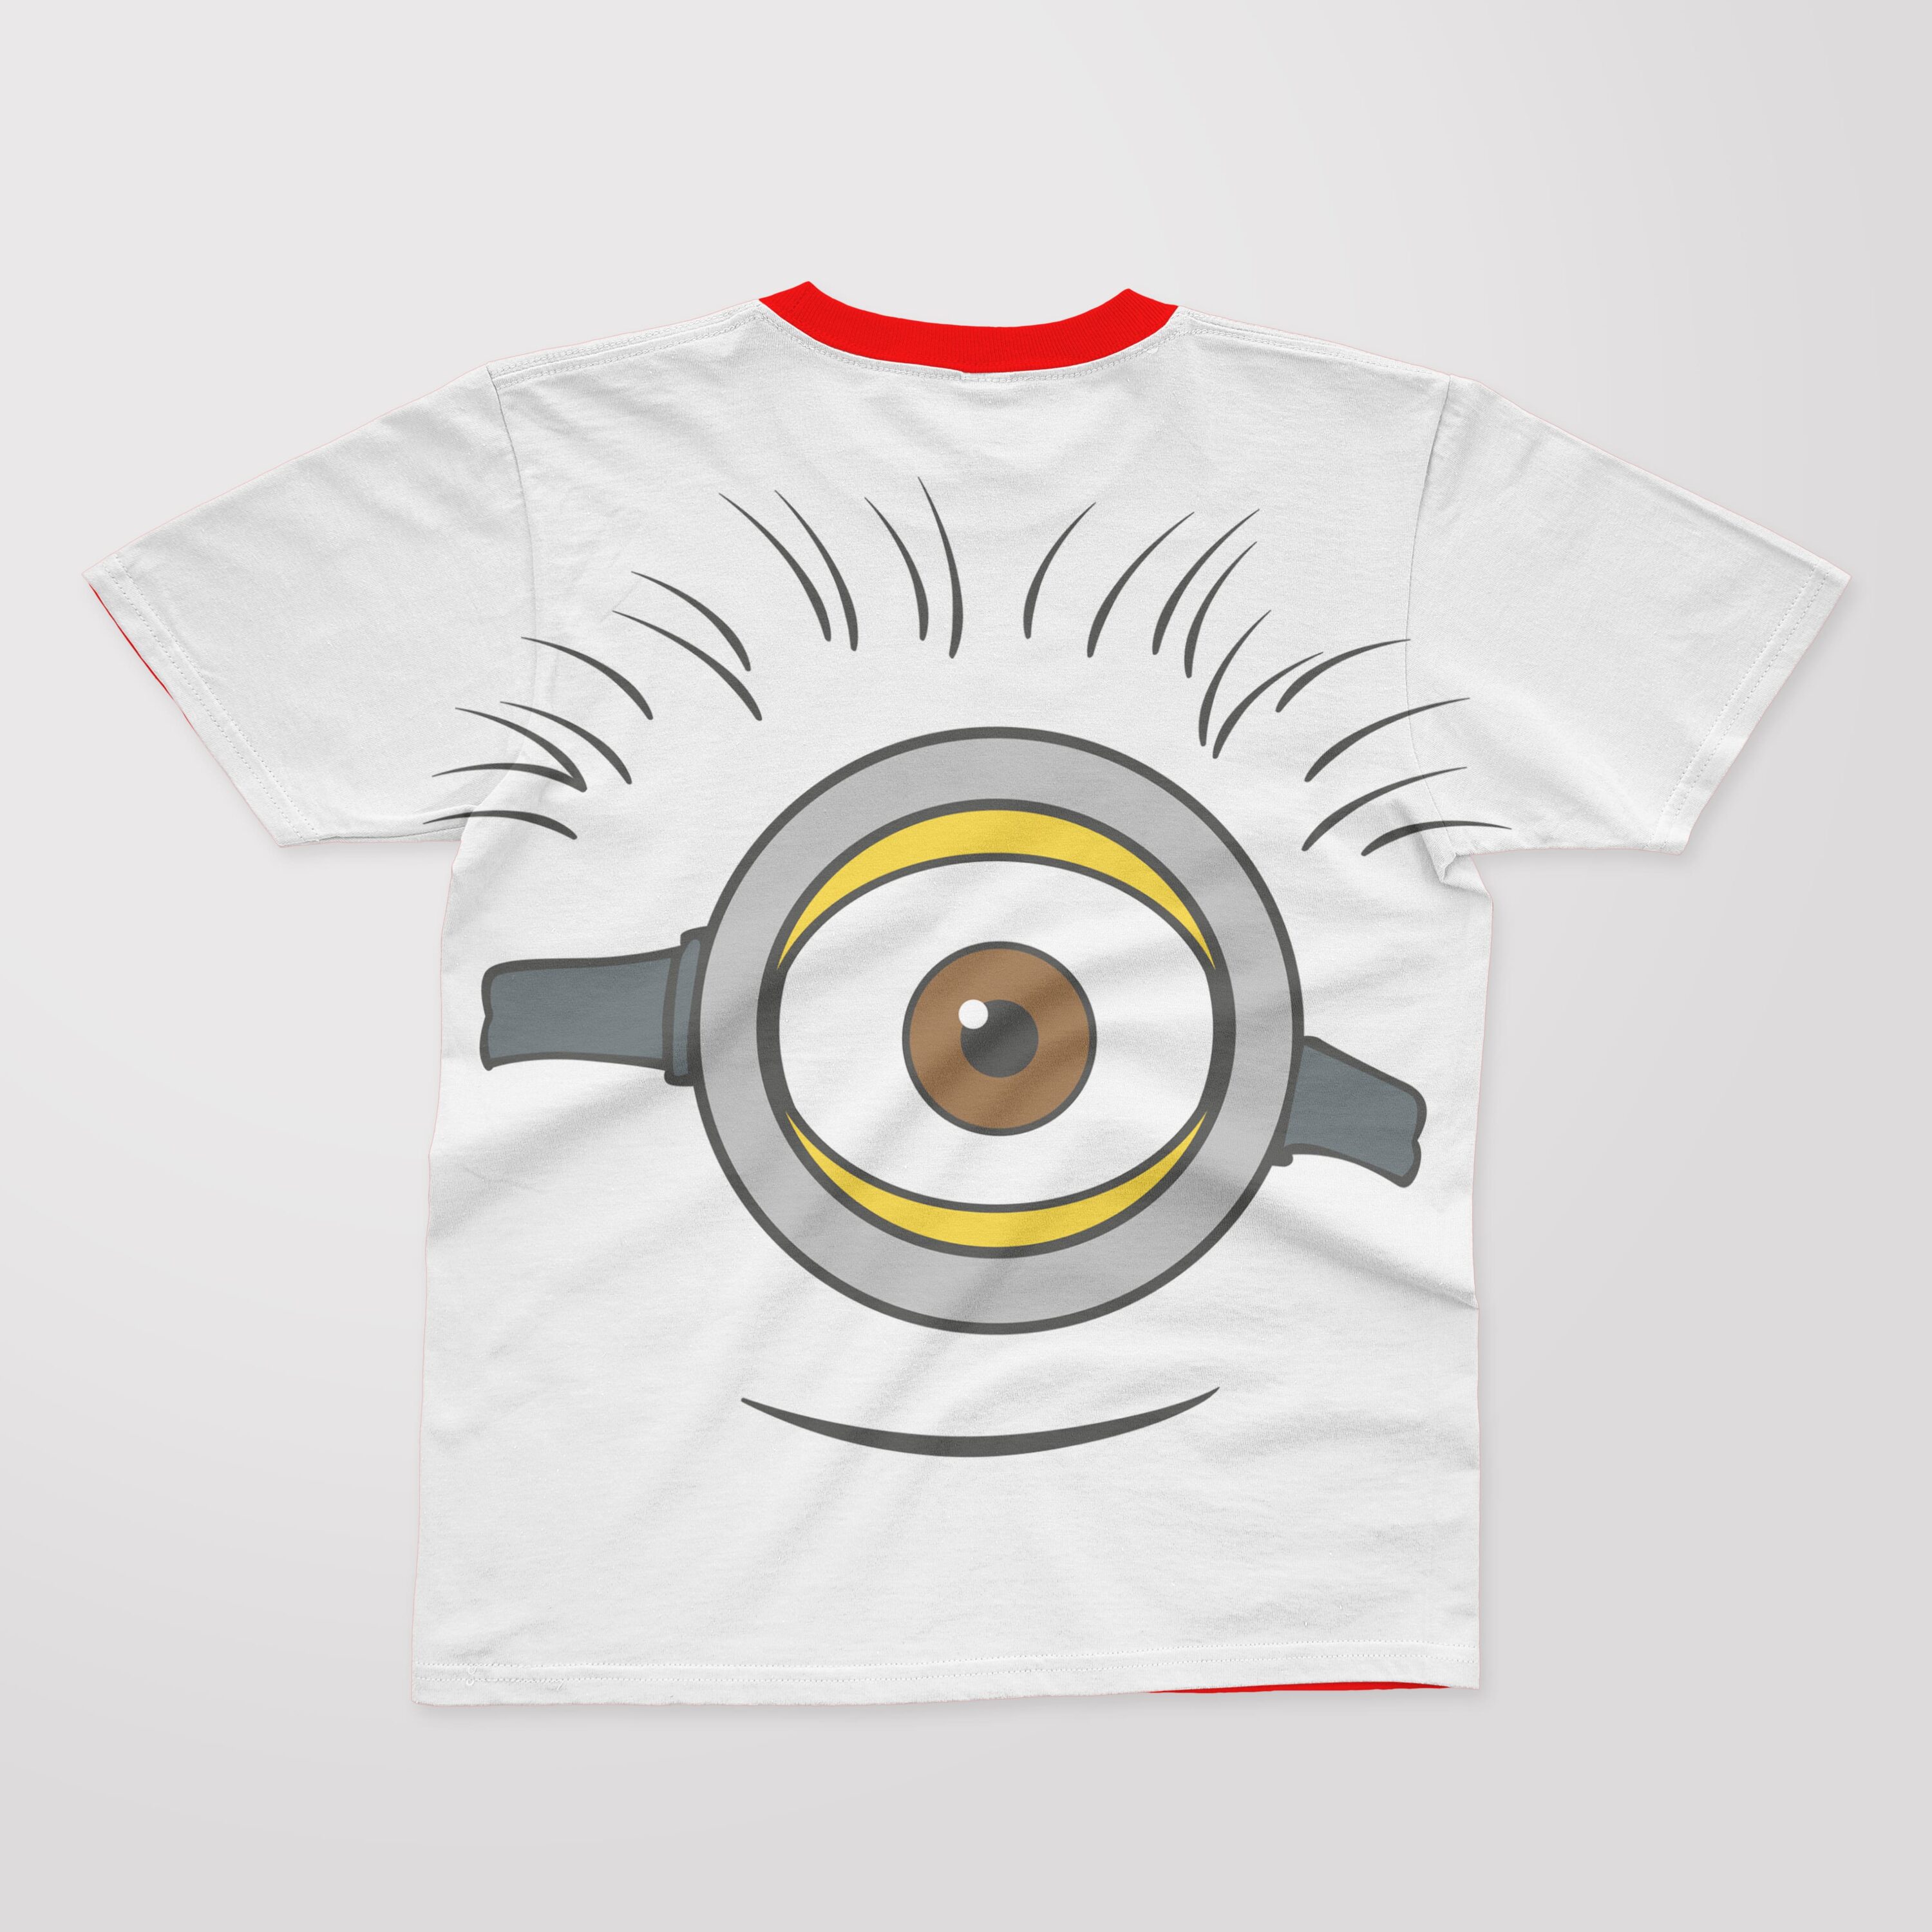 A white T-shirt with a red collar and a face of a happy minion.